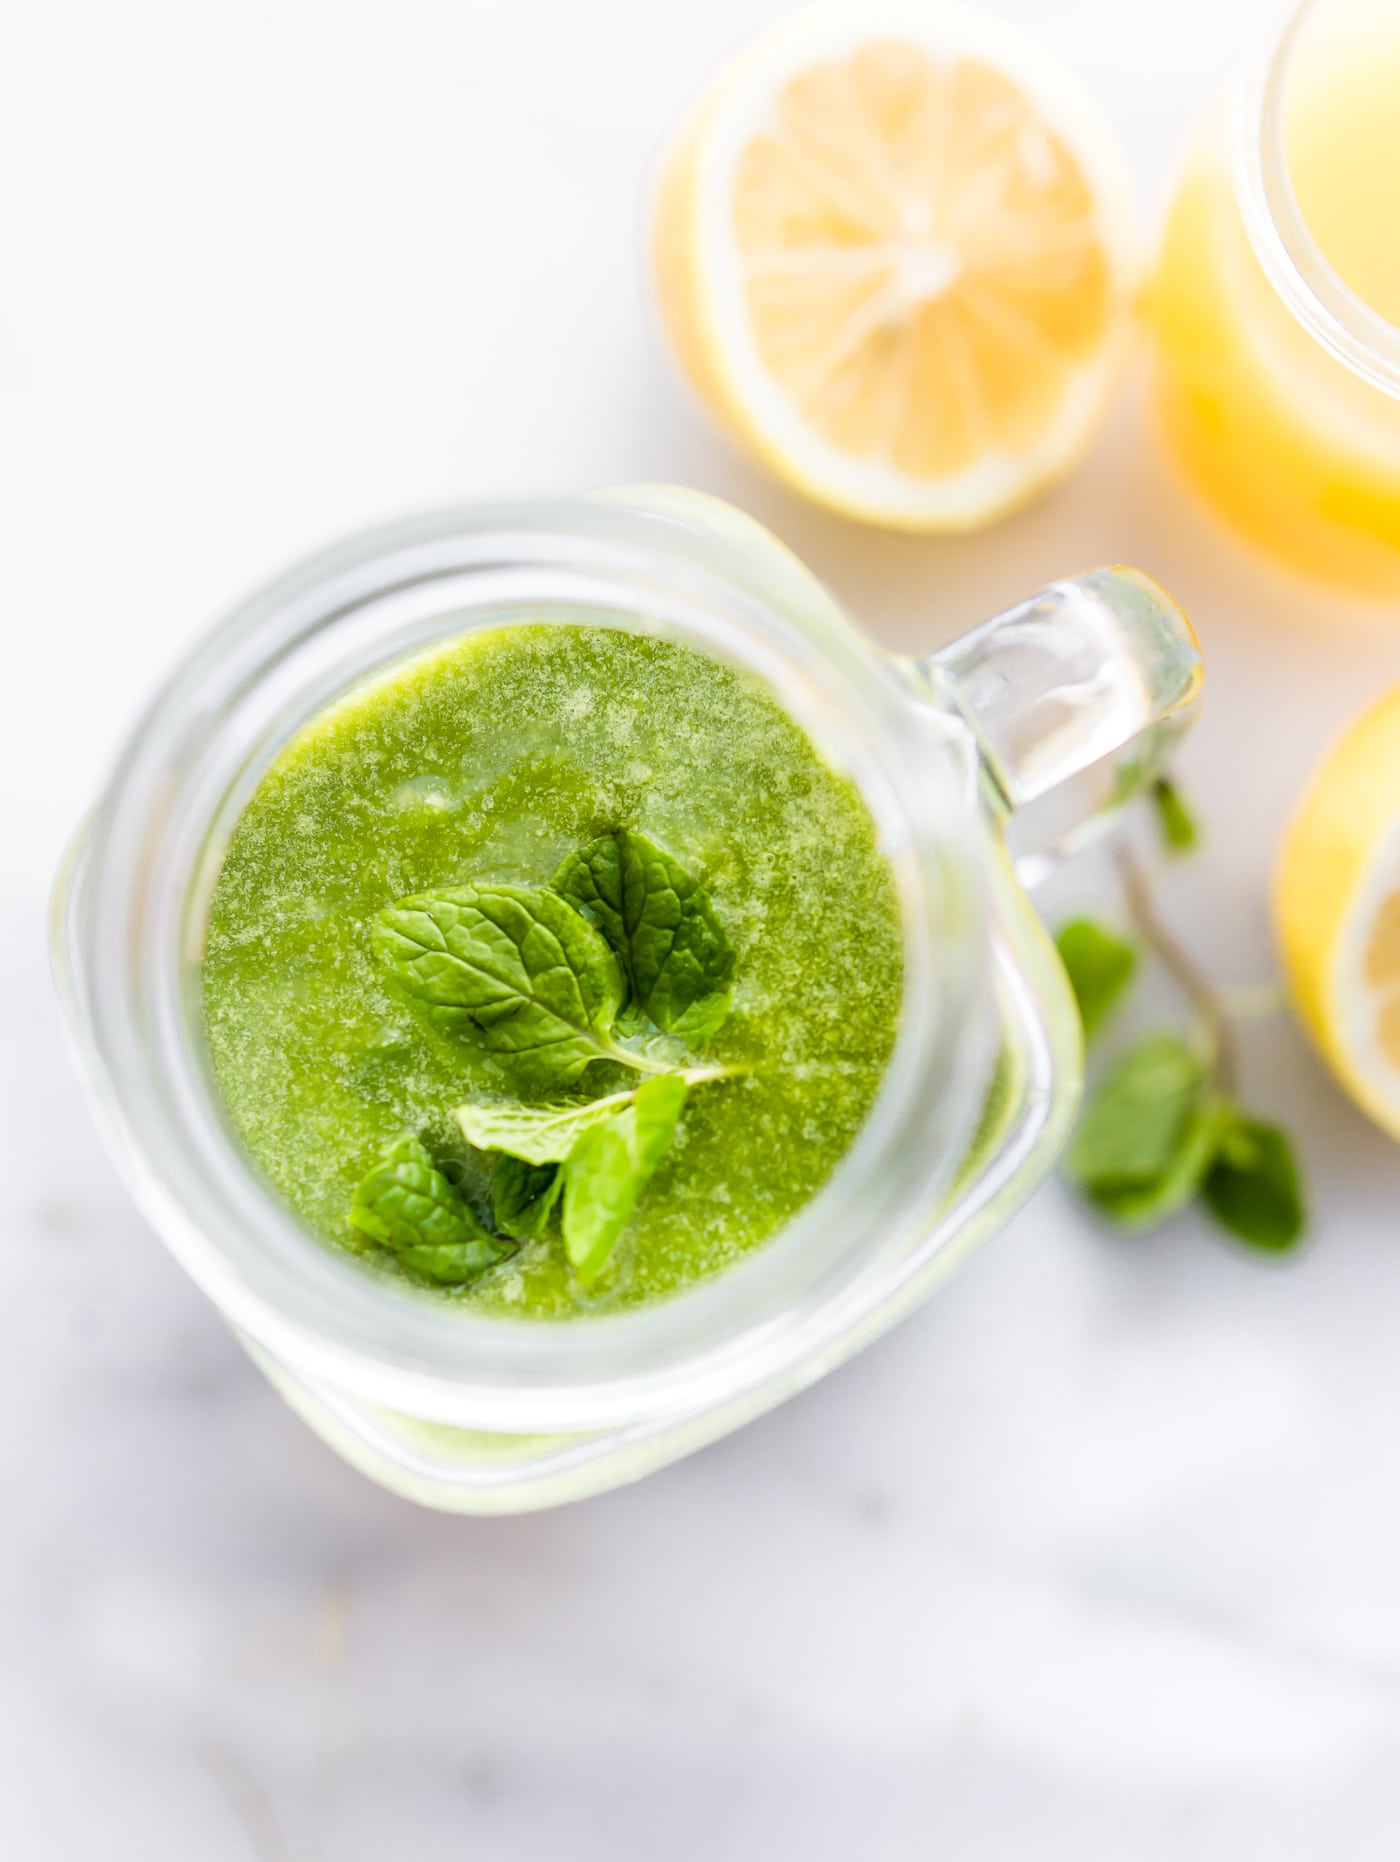 Looking into mason jar cup filled with bright green smoothie with sprig of fresh mint on top.